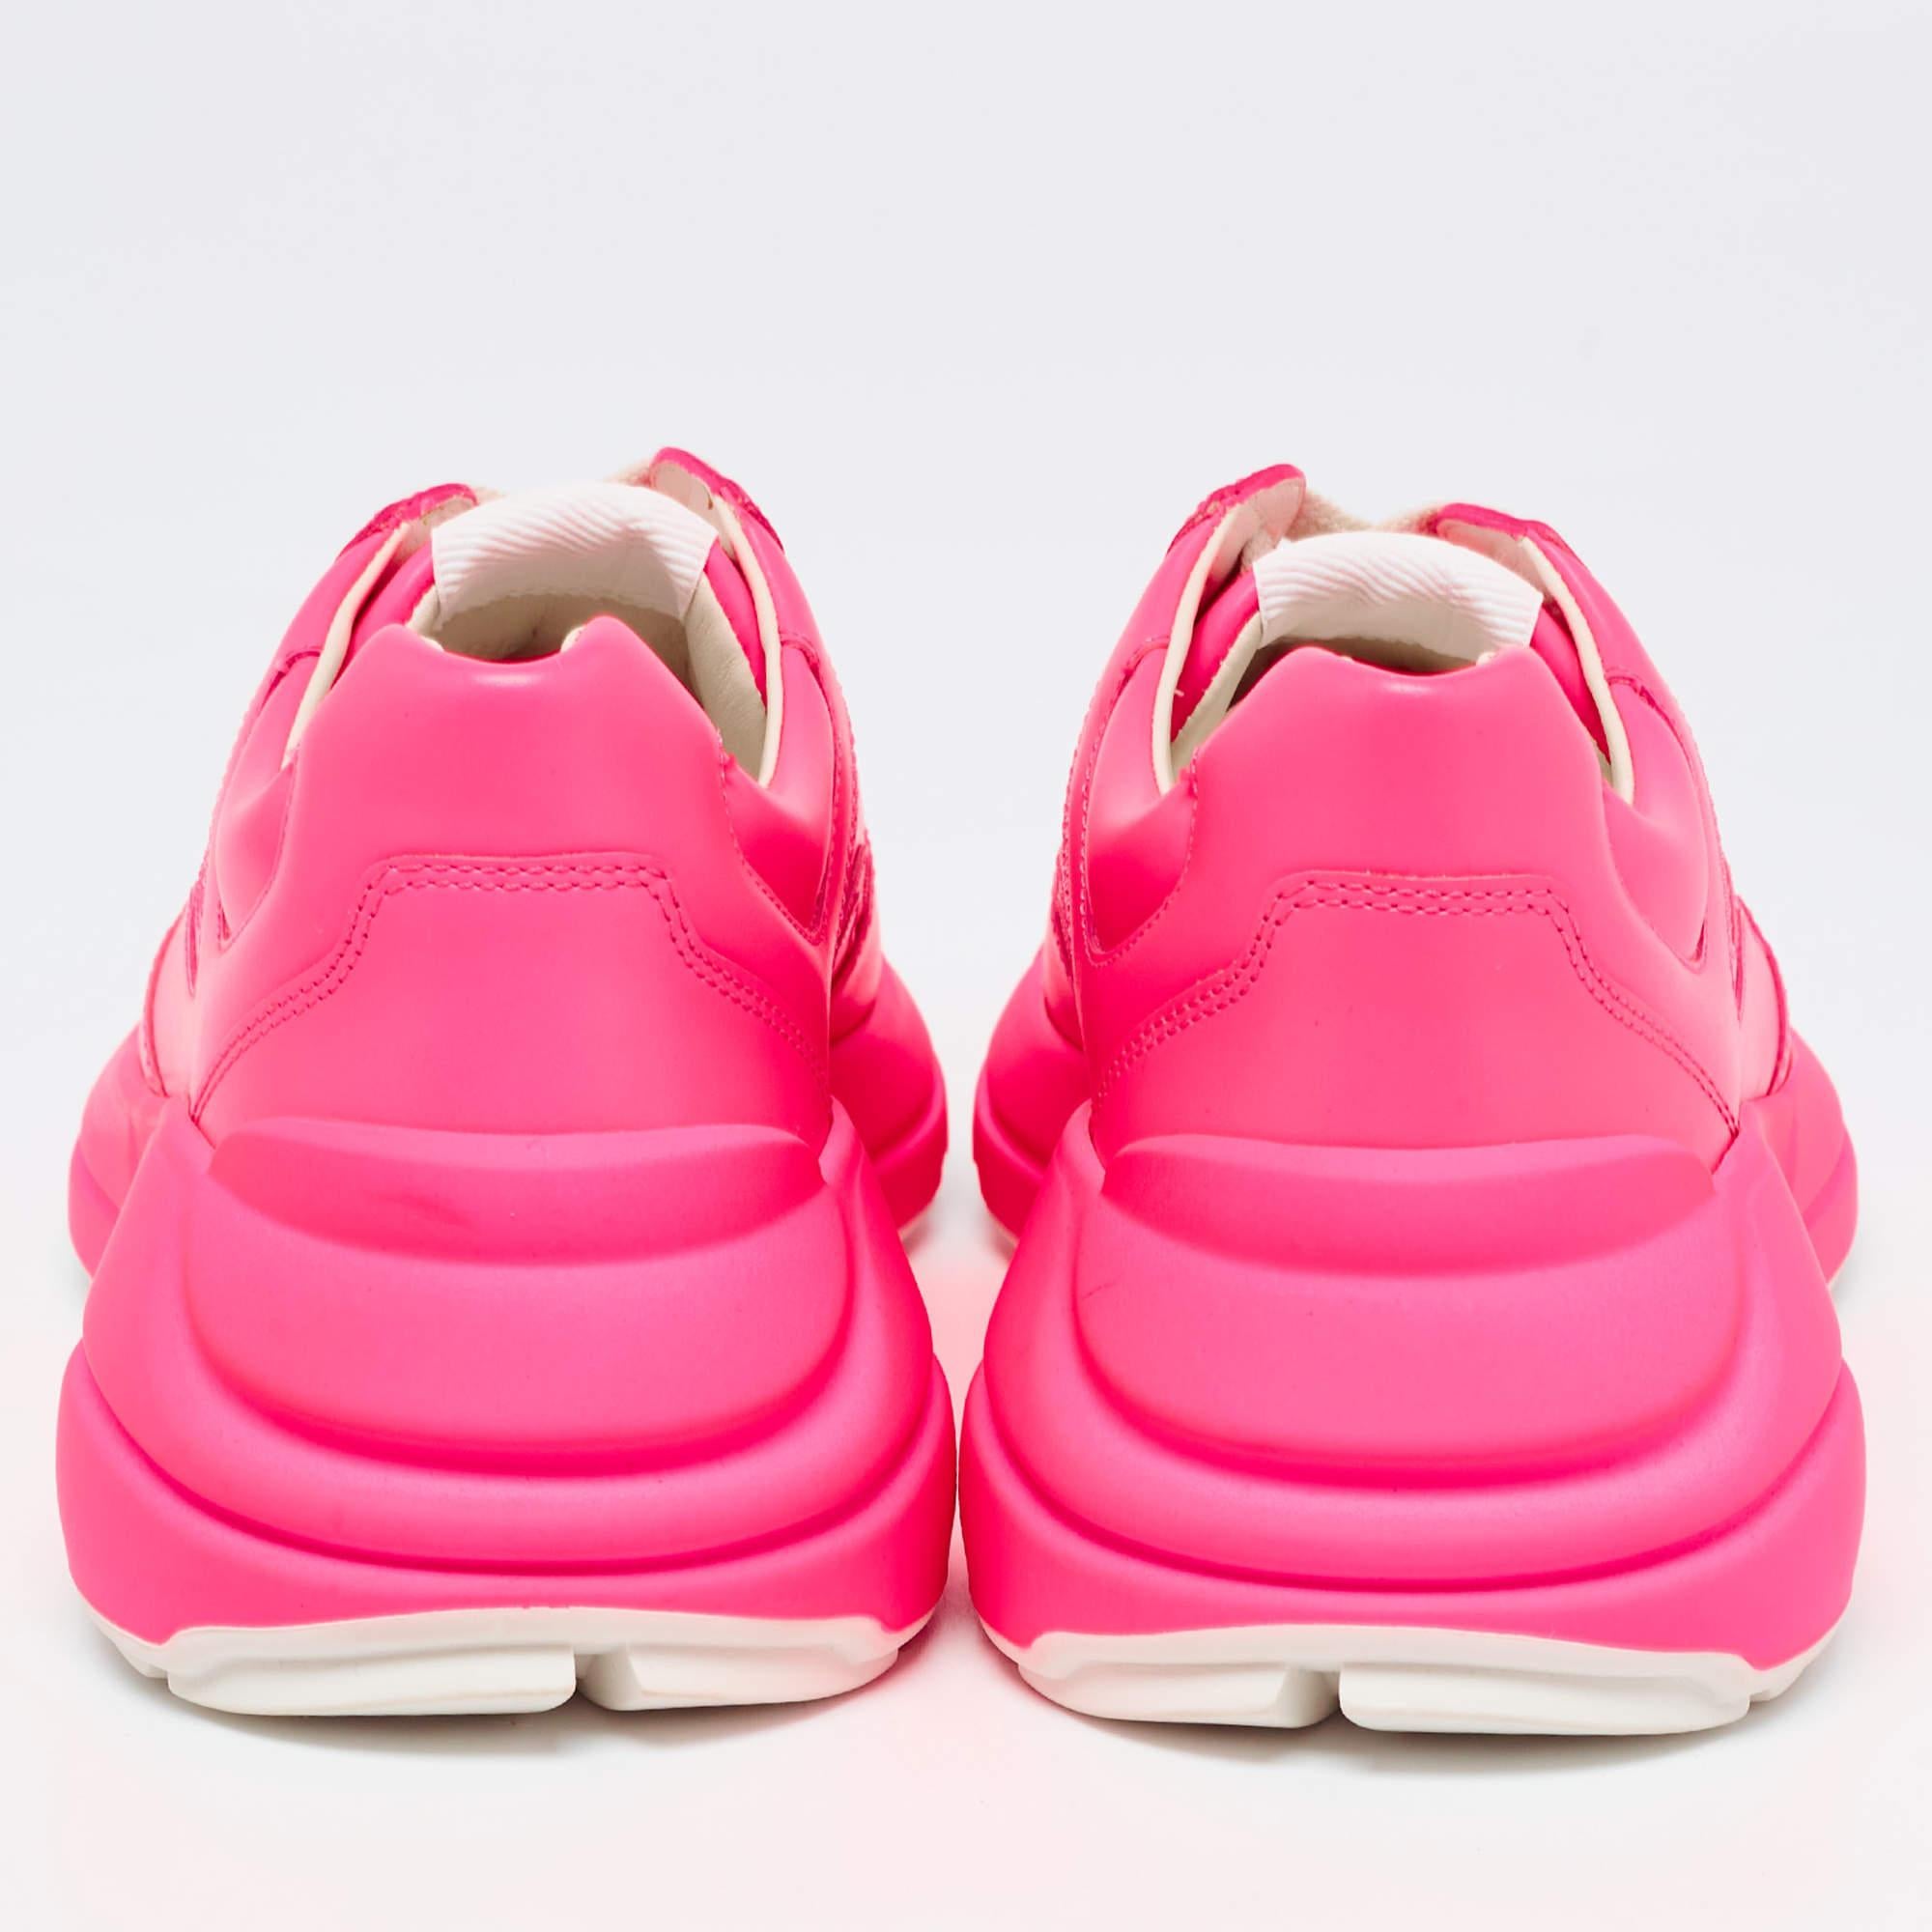 Gucci Neon Pink Leather Rhyton Sneakers Size 39 3